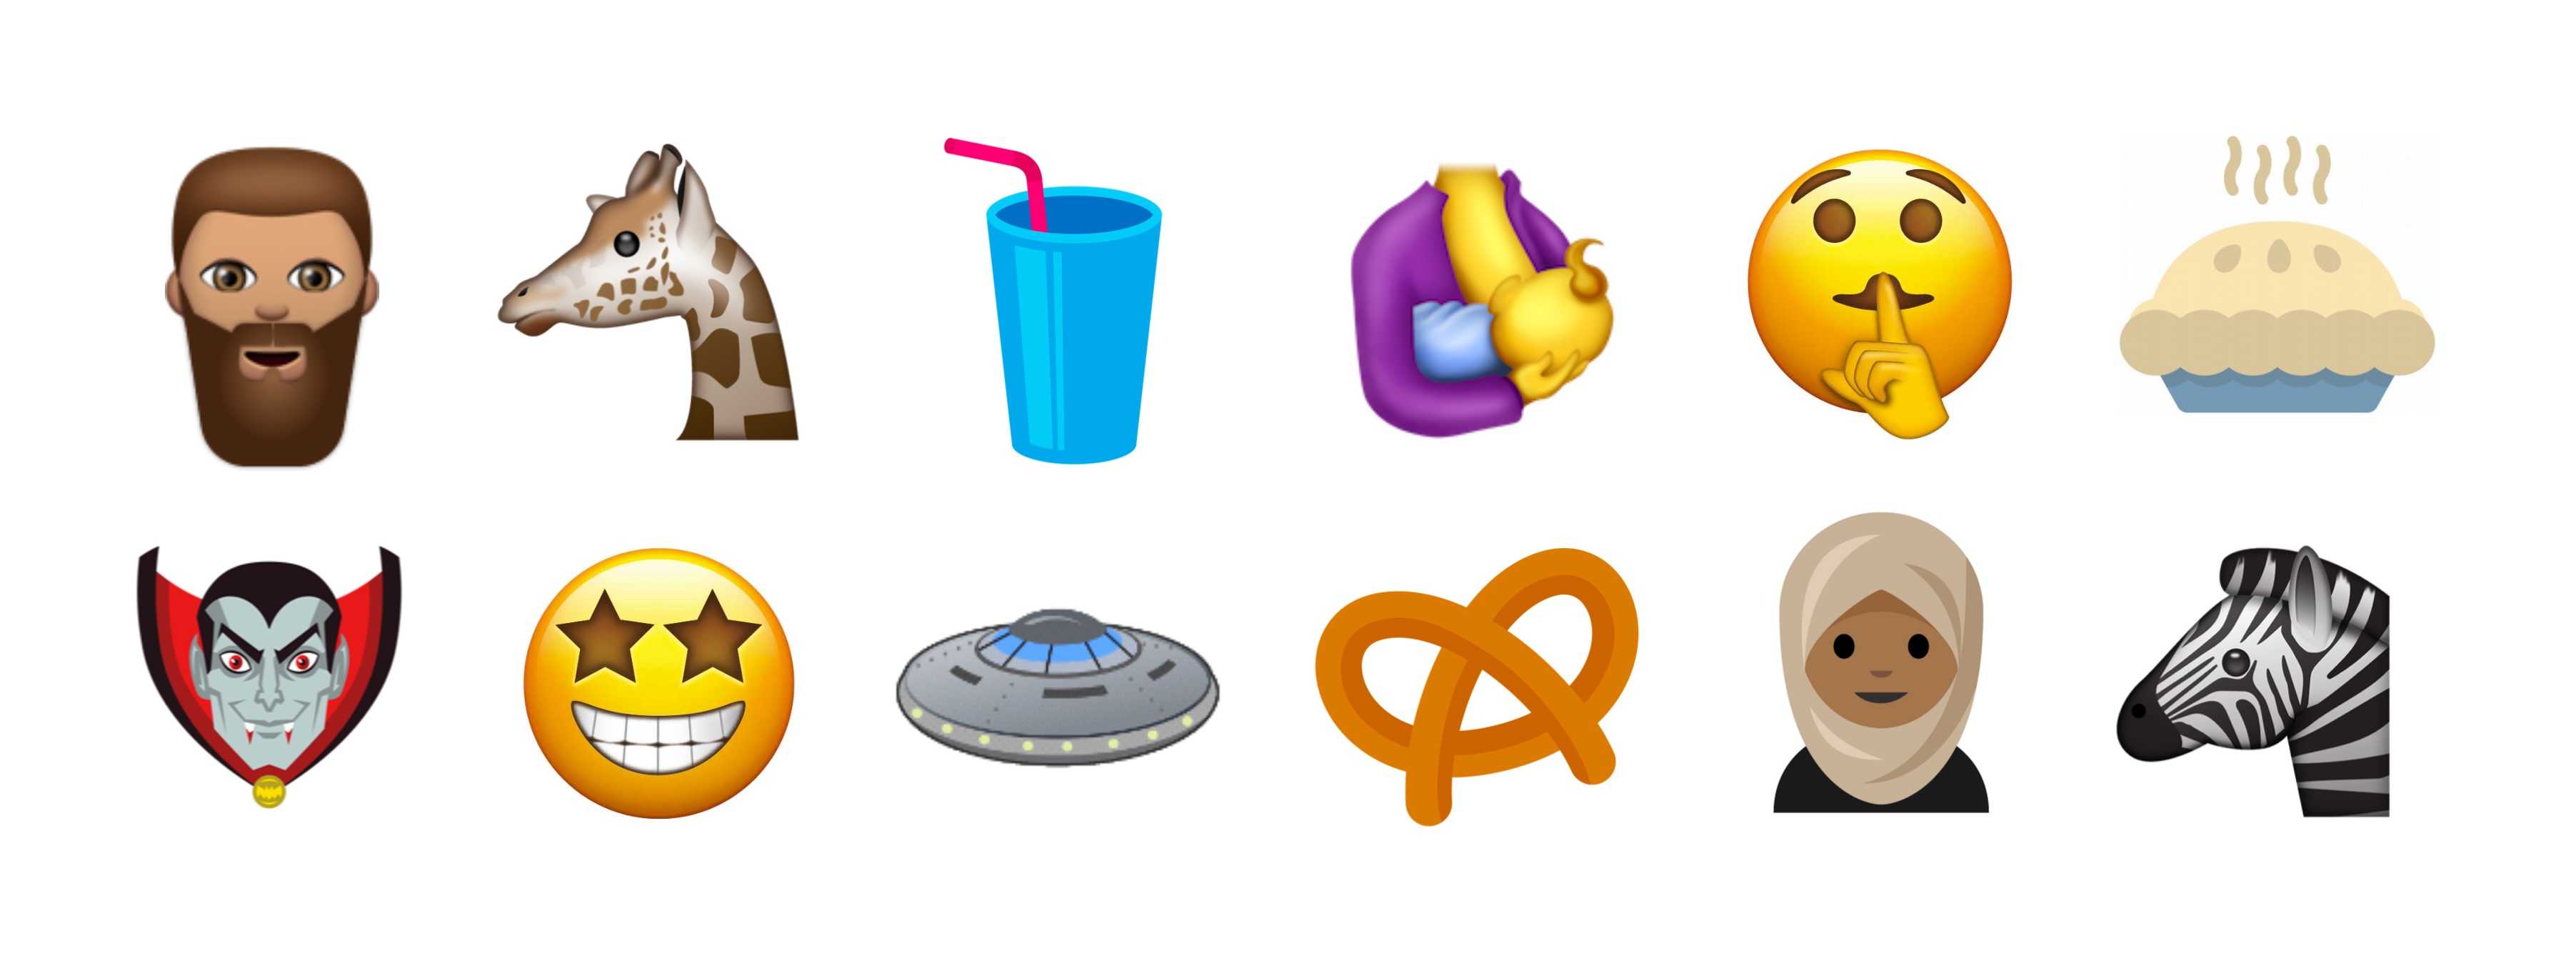 51 new emoji are coming in 2017.